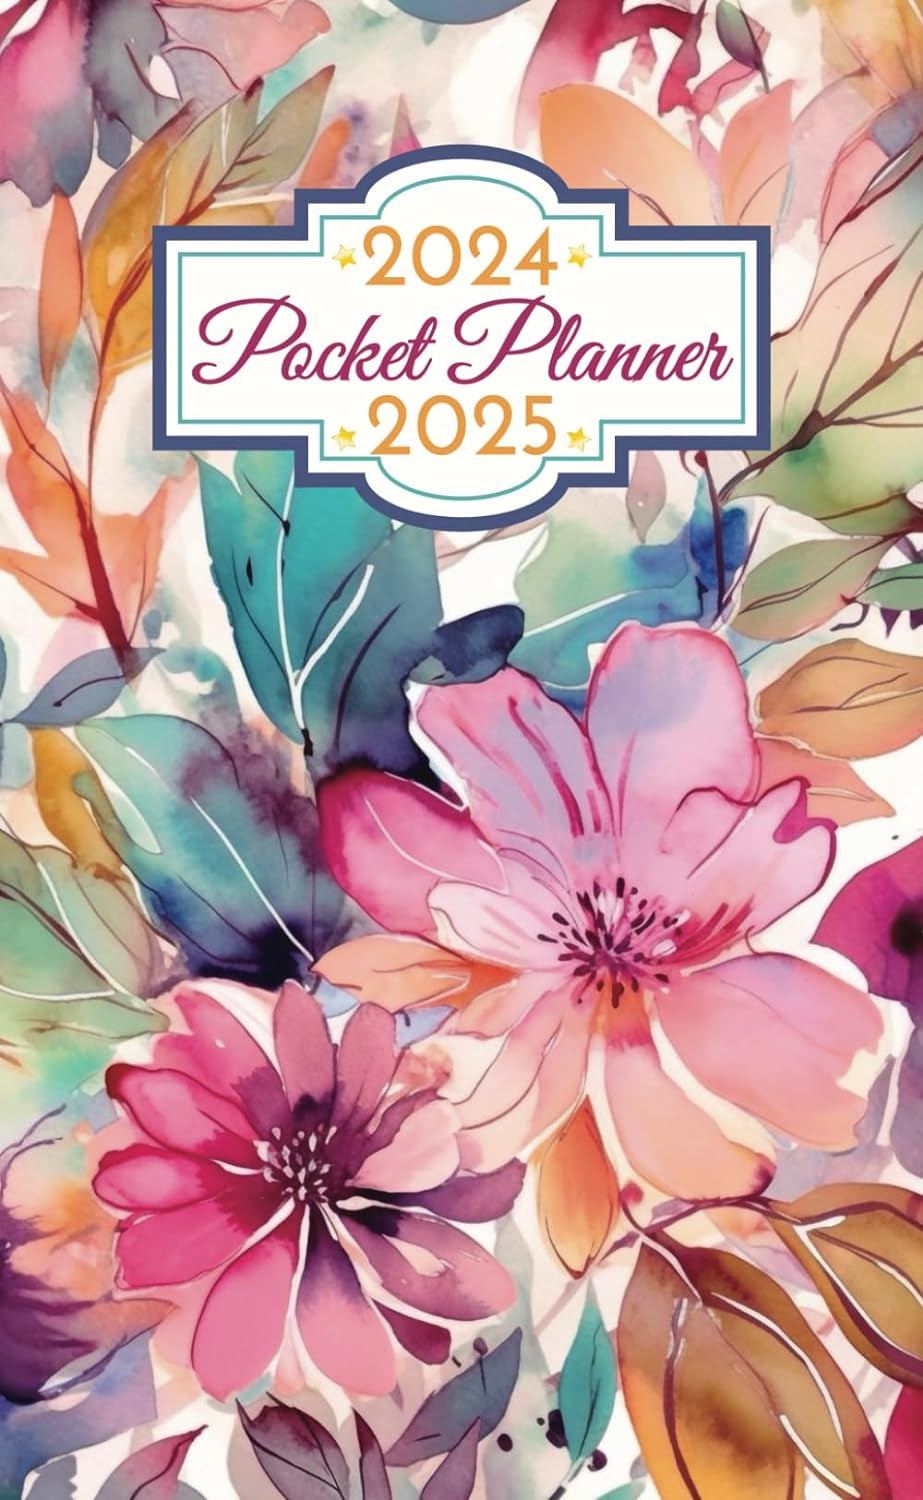 2024-2025 Pocket Planner: Small 2 Year Pocket Calendar Monthly Agenda for Purse,